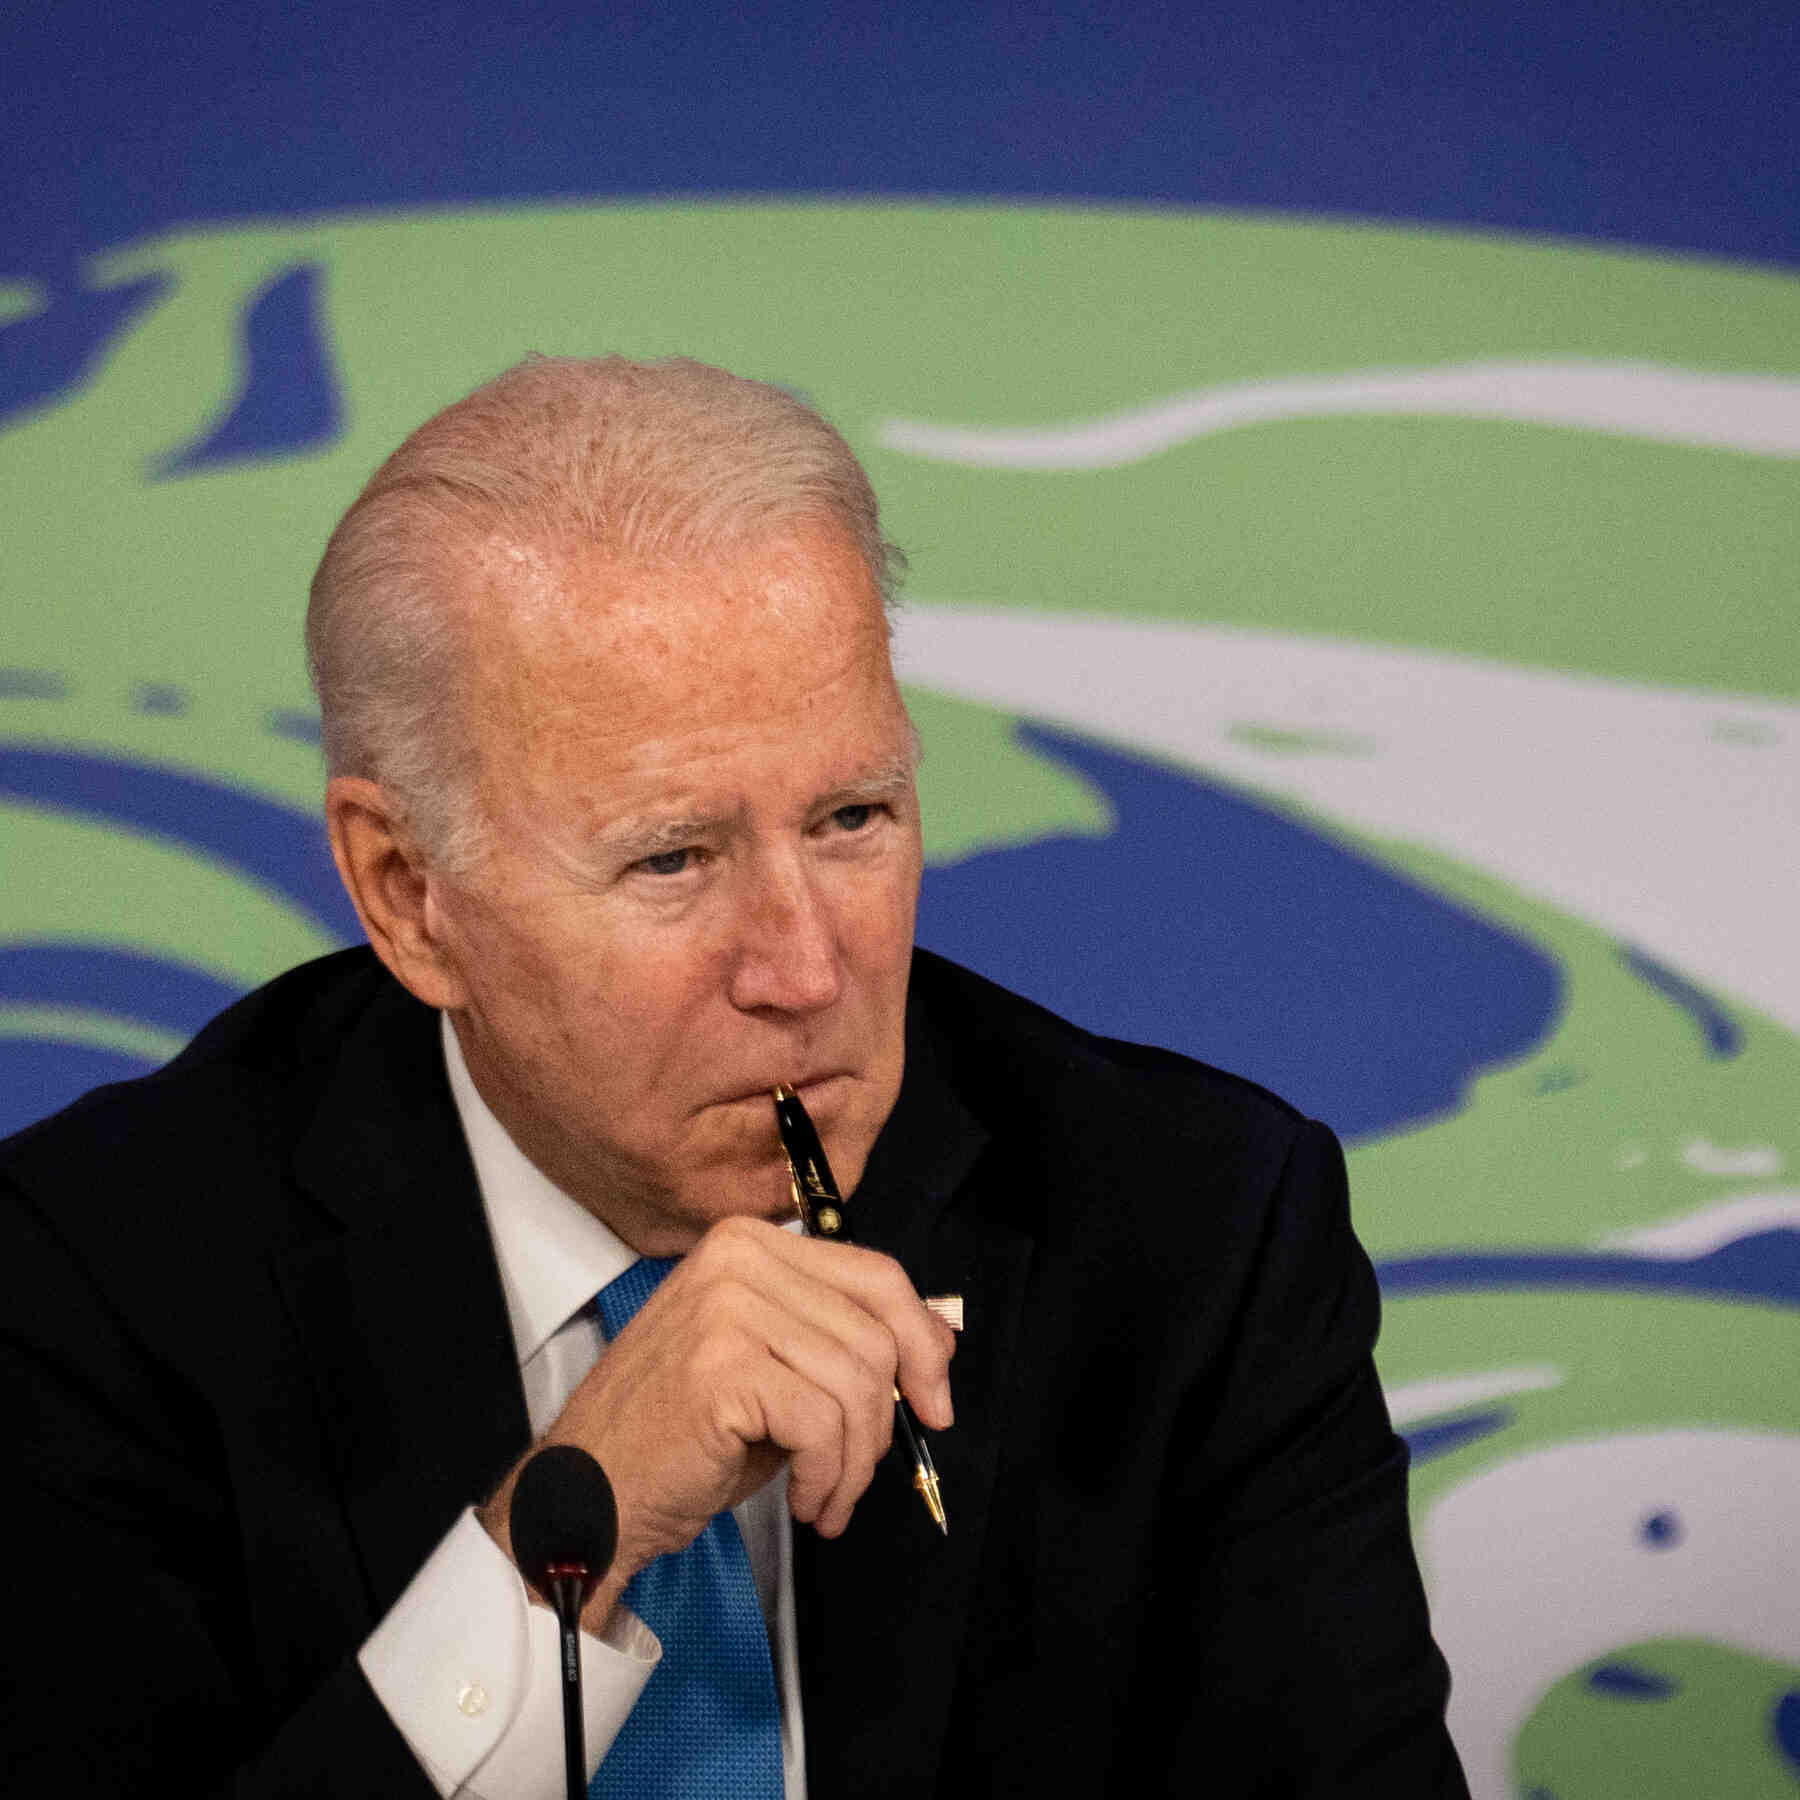 Biden is taking action to ease the trade turmoil that threatens his solar energy ambitions